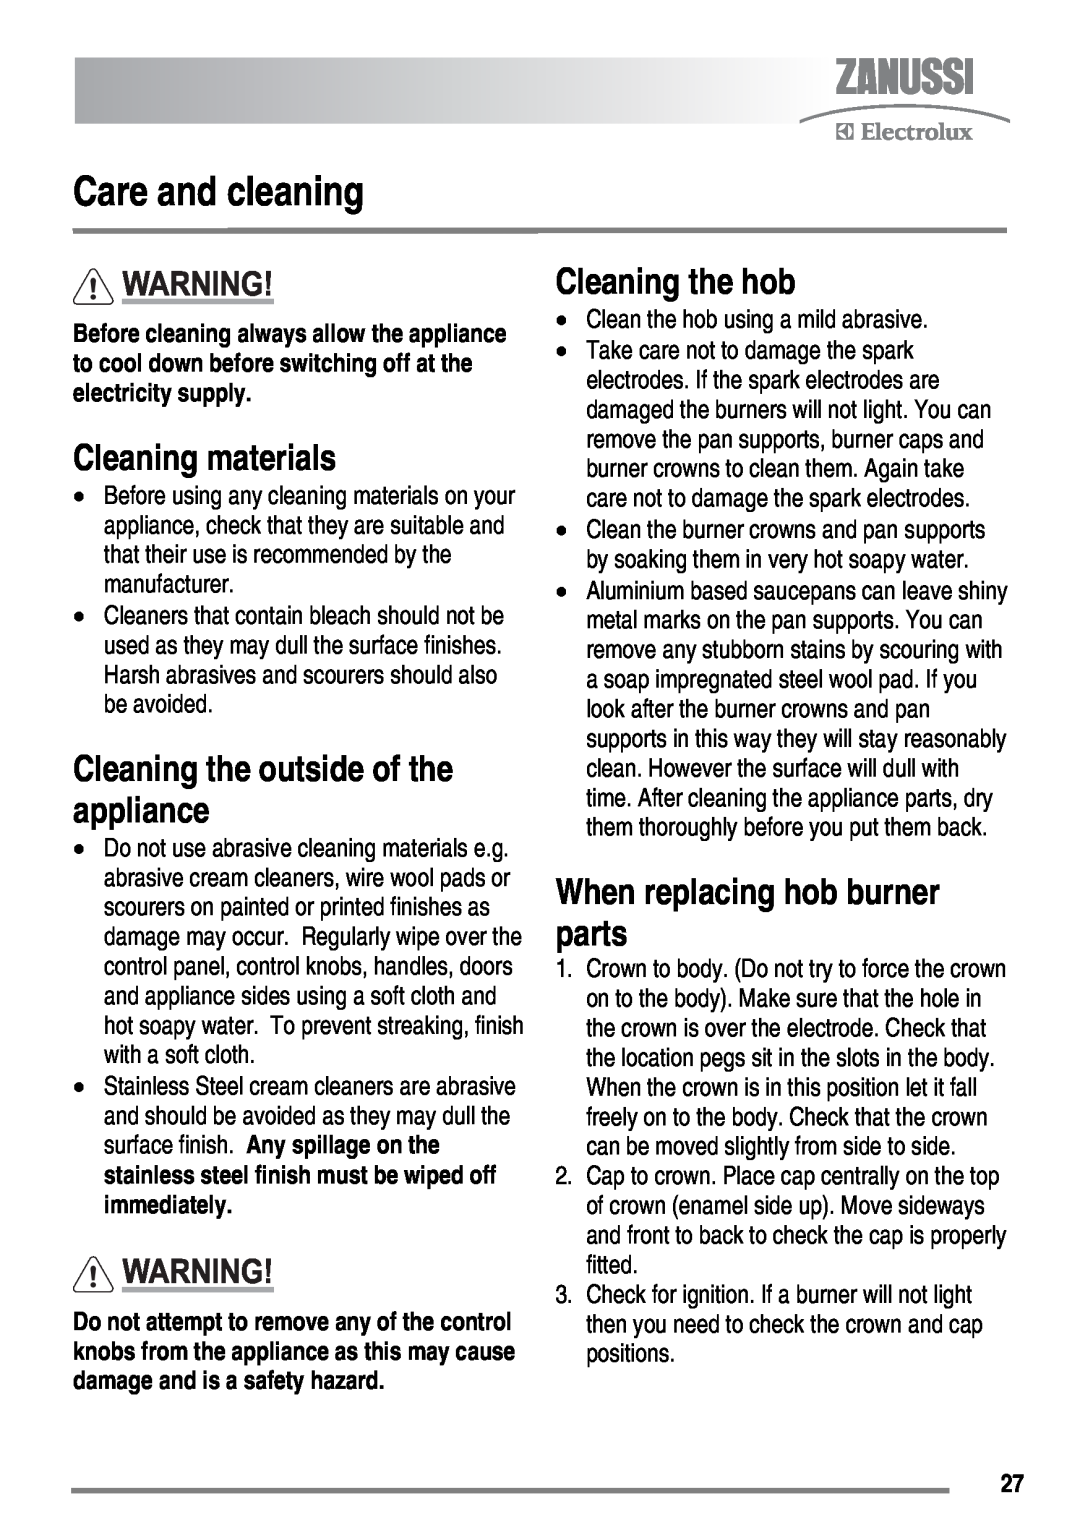 Zanussi FH10 user manual Care and cleaning, Cleaning materials, Cleaning the outside of the appliance, Cleaning the hob 